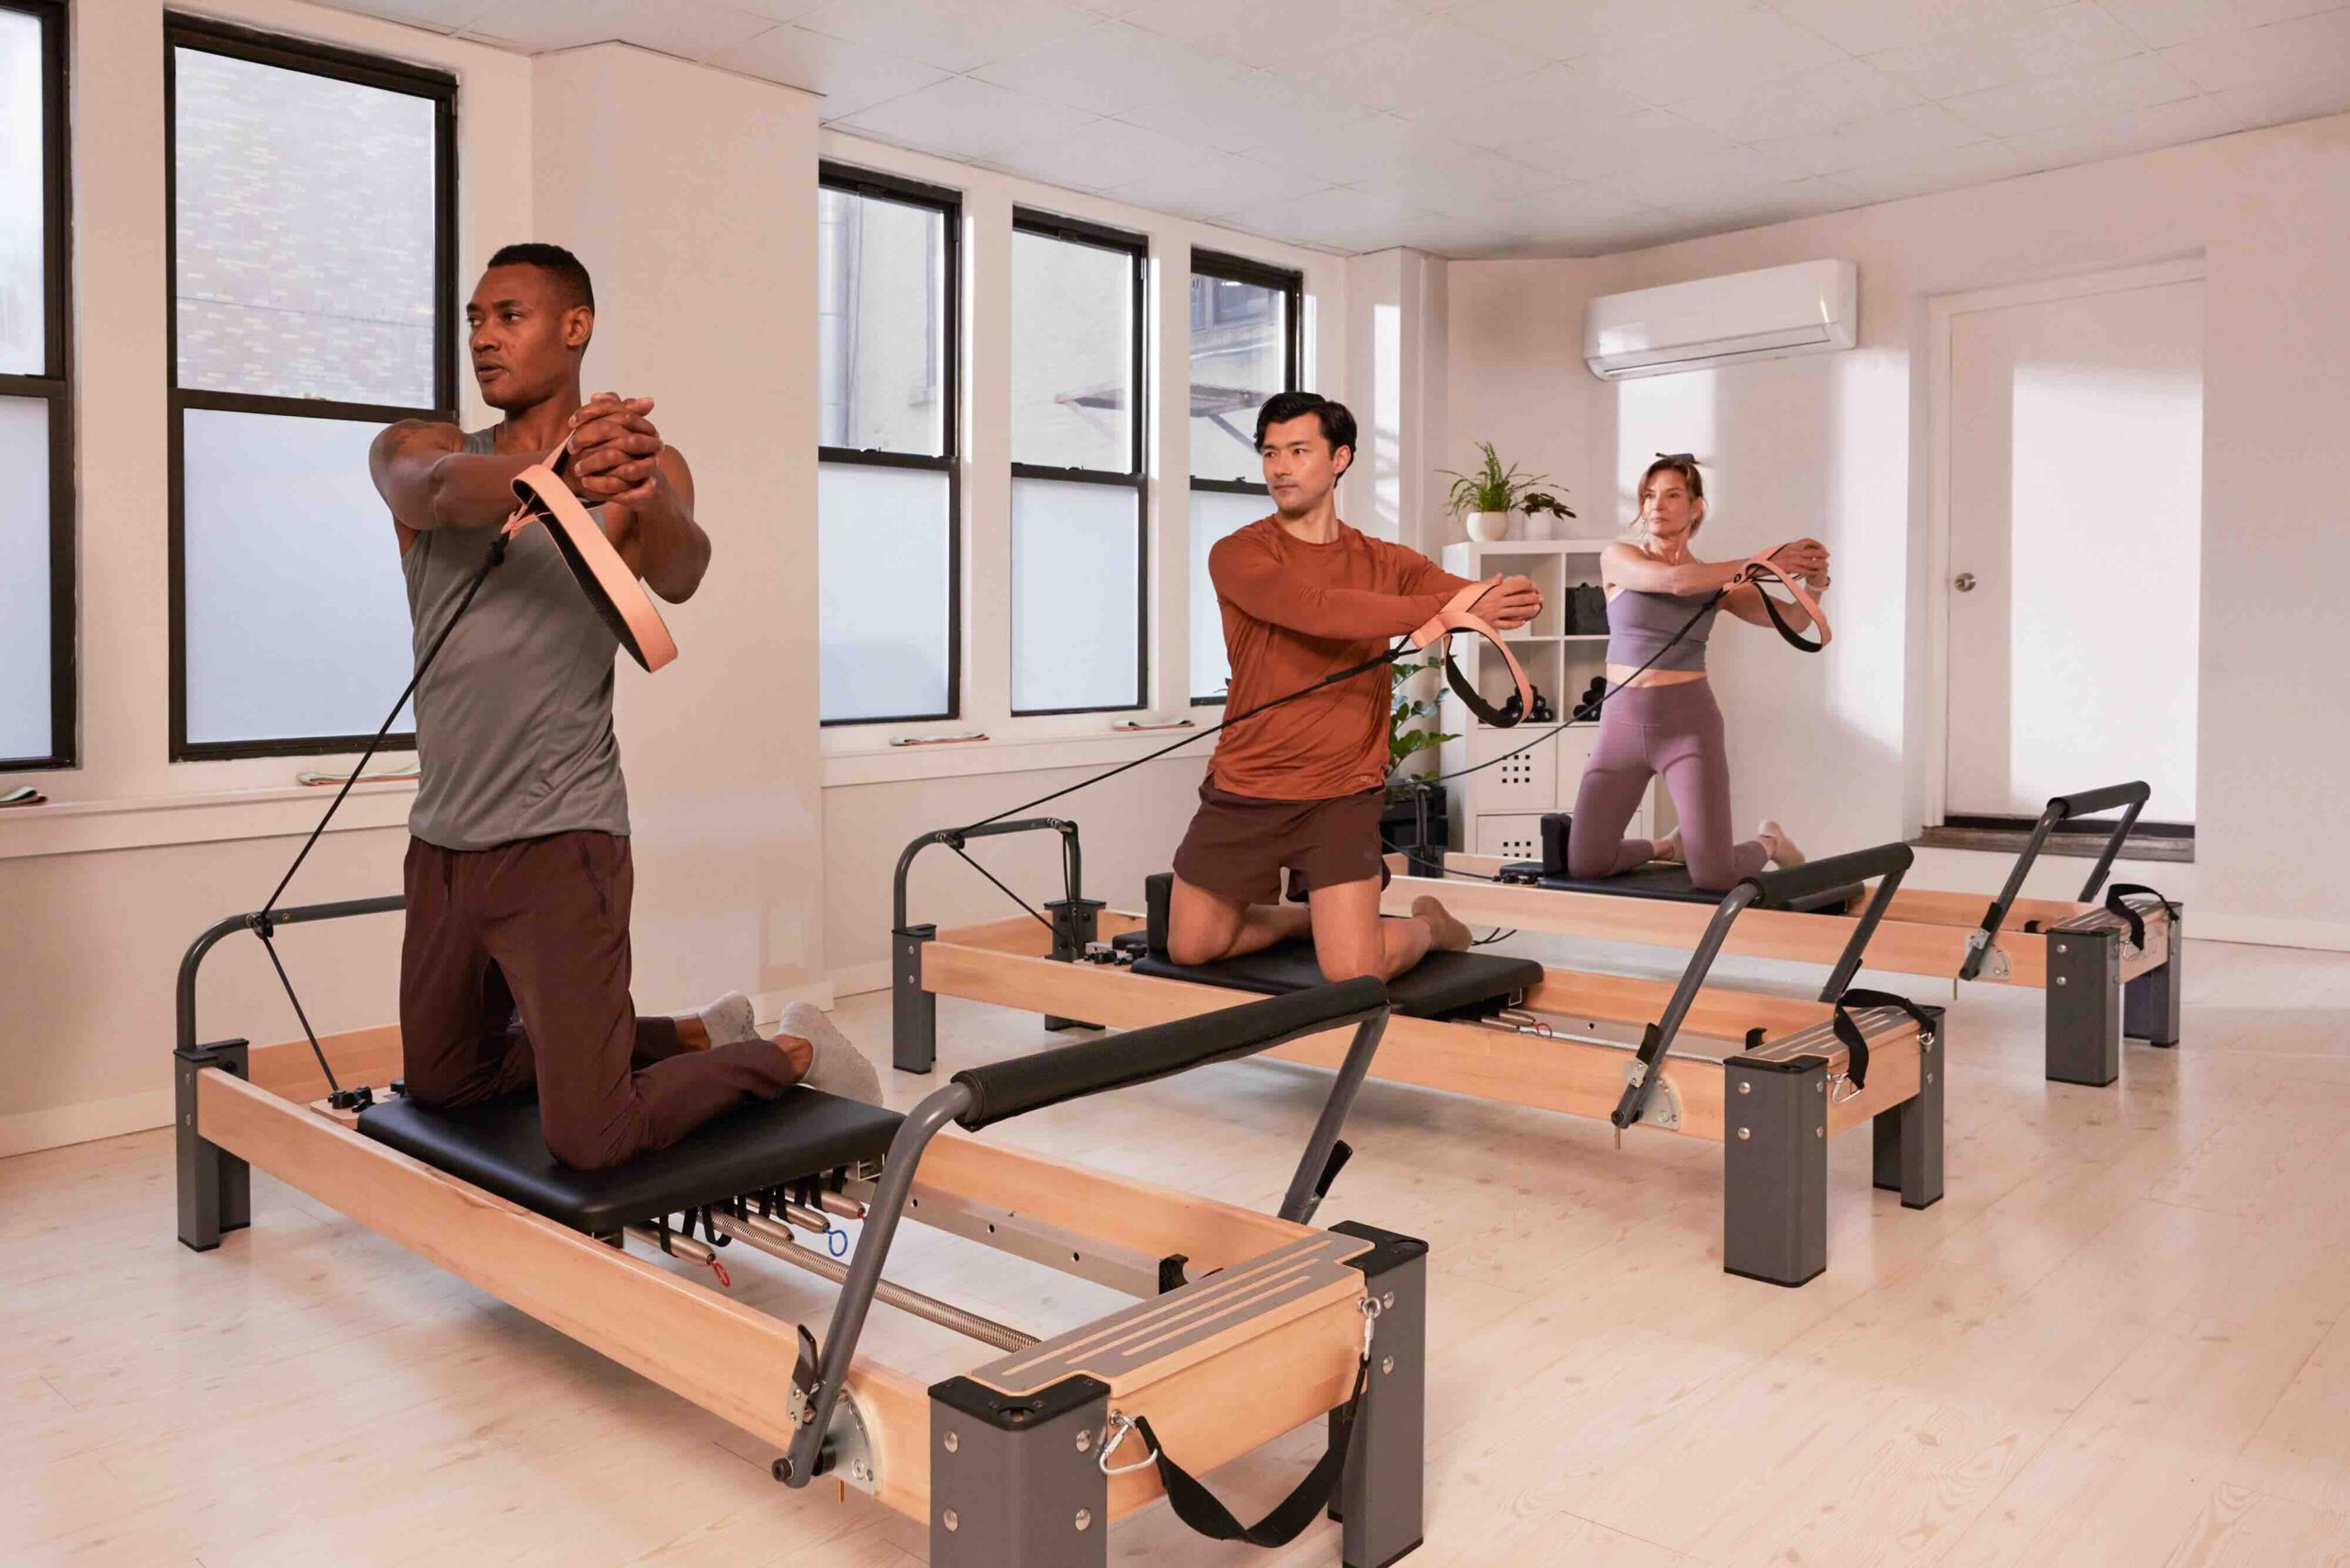 What is Reformer Pilates and why is it so effective?